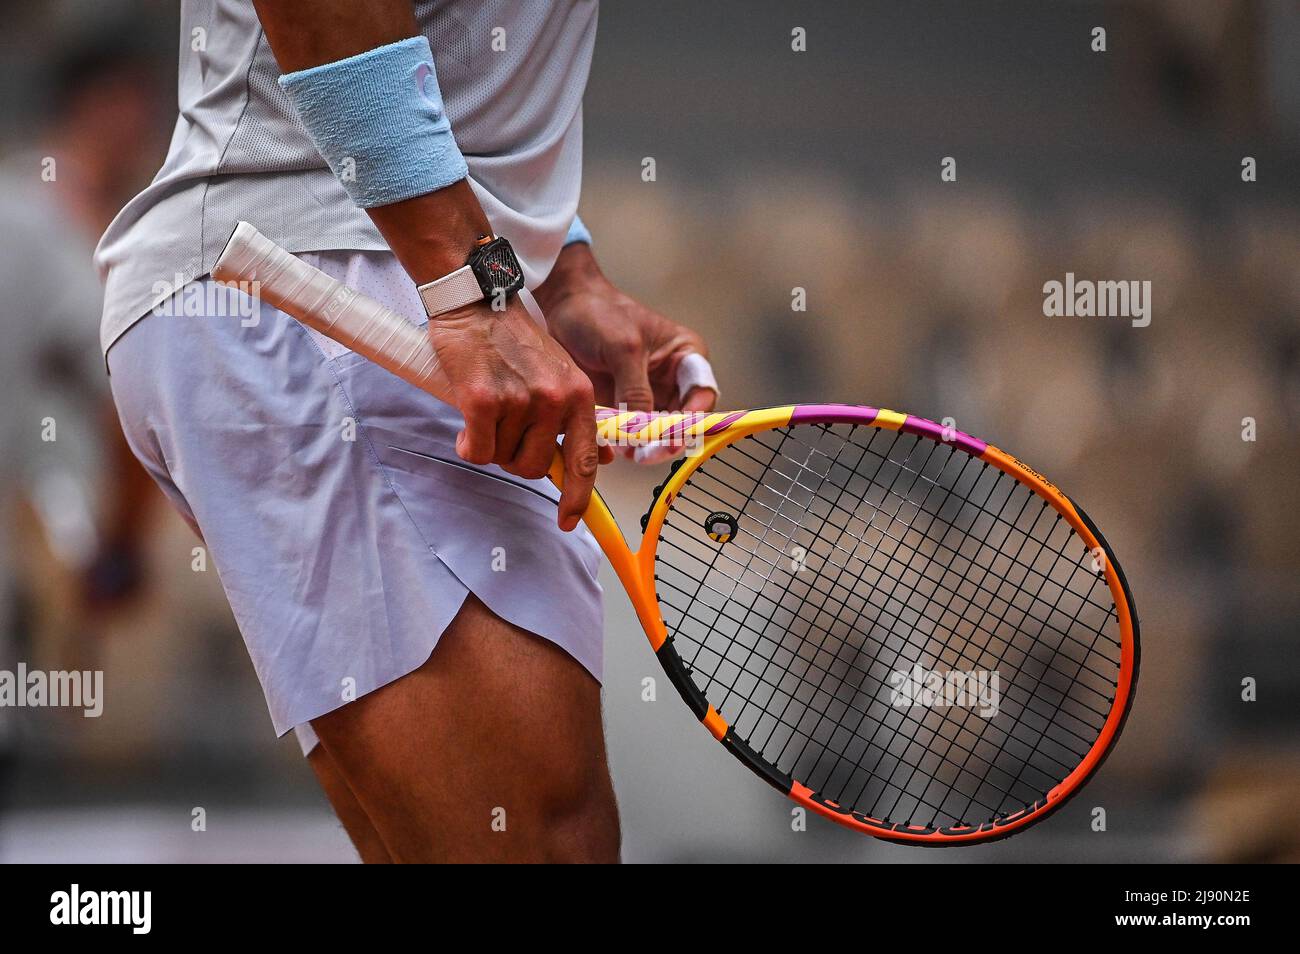 Illustration of watch and tennis racket of Rafael NADAL of Spain during a training session of Roland-Garros 2022, French Open 2022, Grand Slam tennis tournament on May 18, 2022 at the Roland-Garros